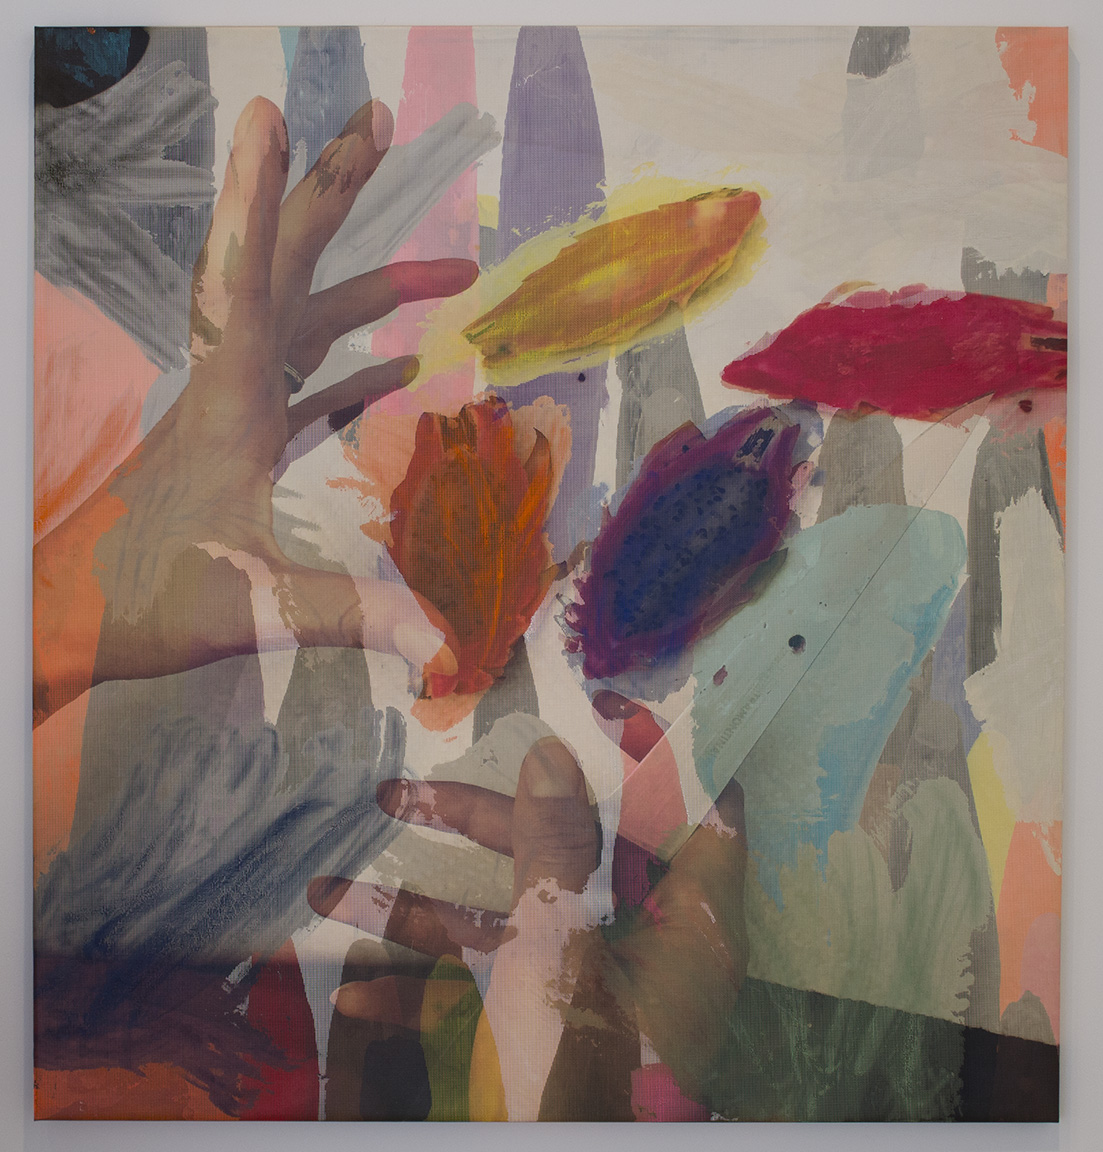 Evan Nesbit, “Manifold Painting (Social Vivisection)” (2018), acrylic and inkjet print on vinyl [THE ONE WITH THE HANDS] (Photo courtesy of James Harris Gallery)   